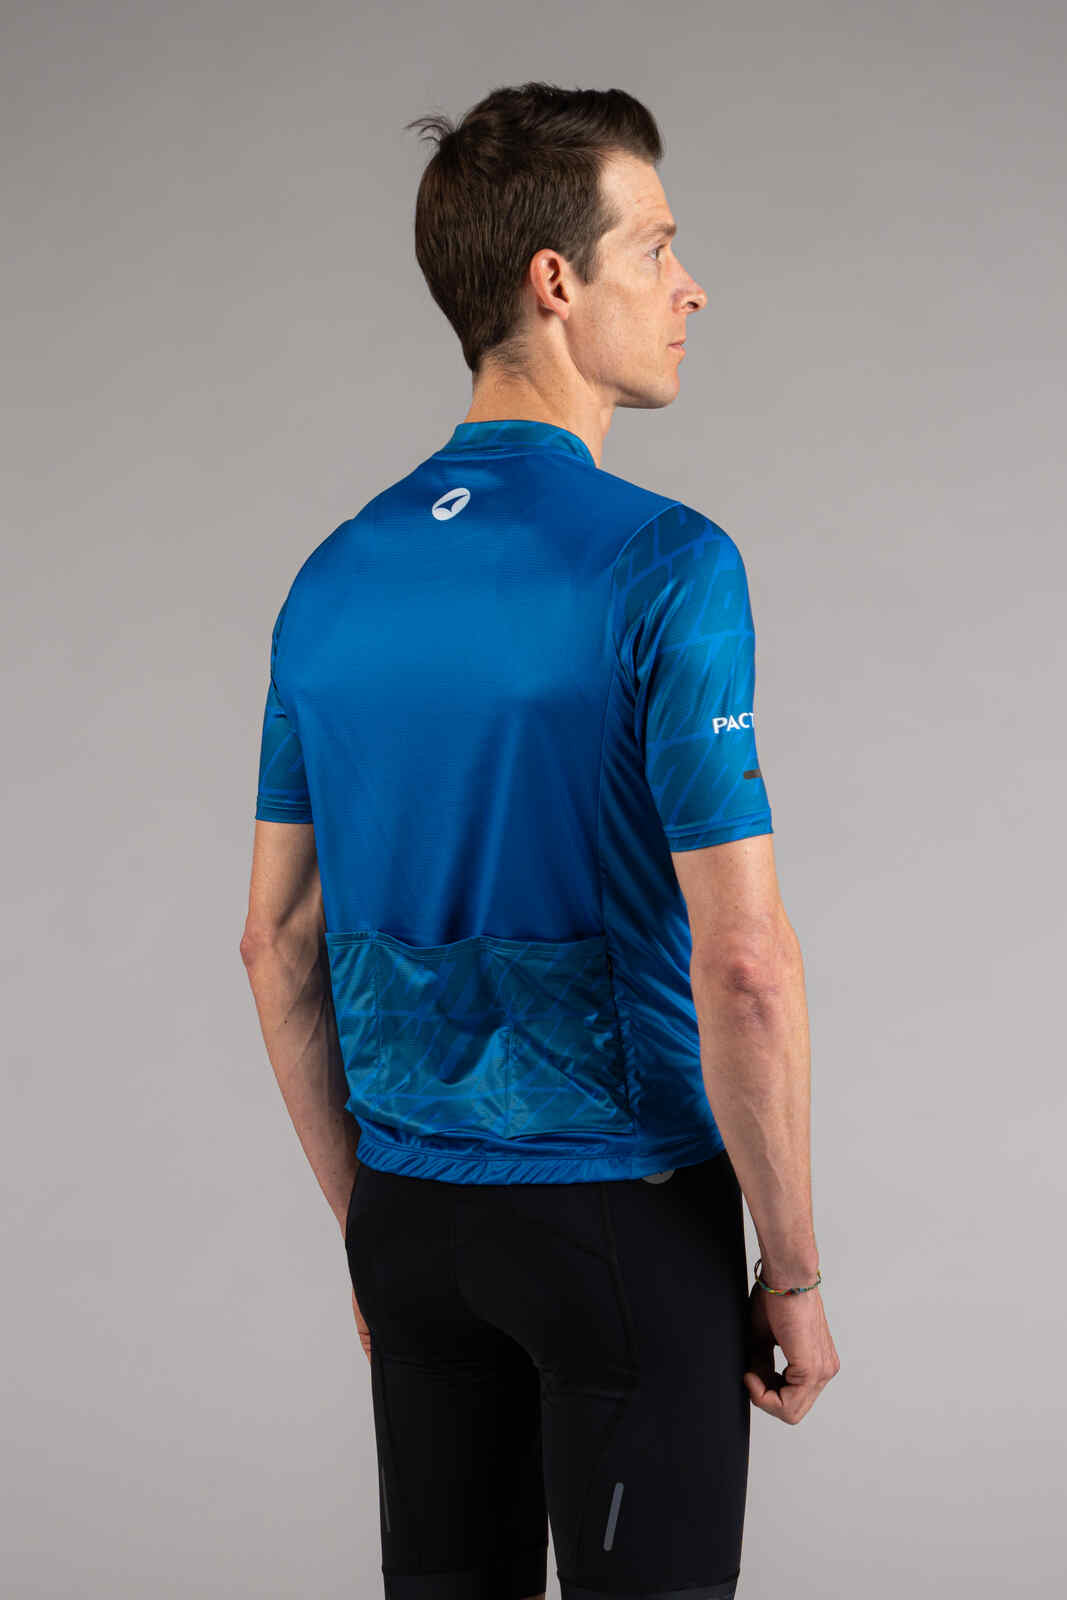 Men's Blue Ascent Cycling Jersey - Back View